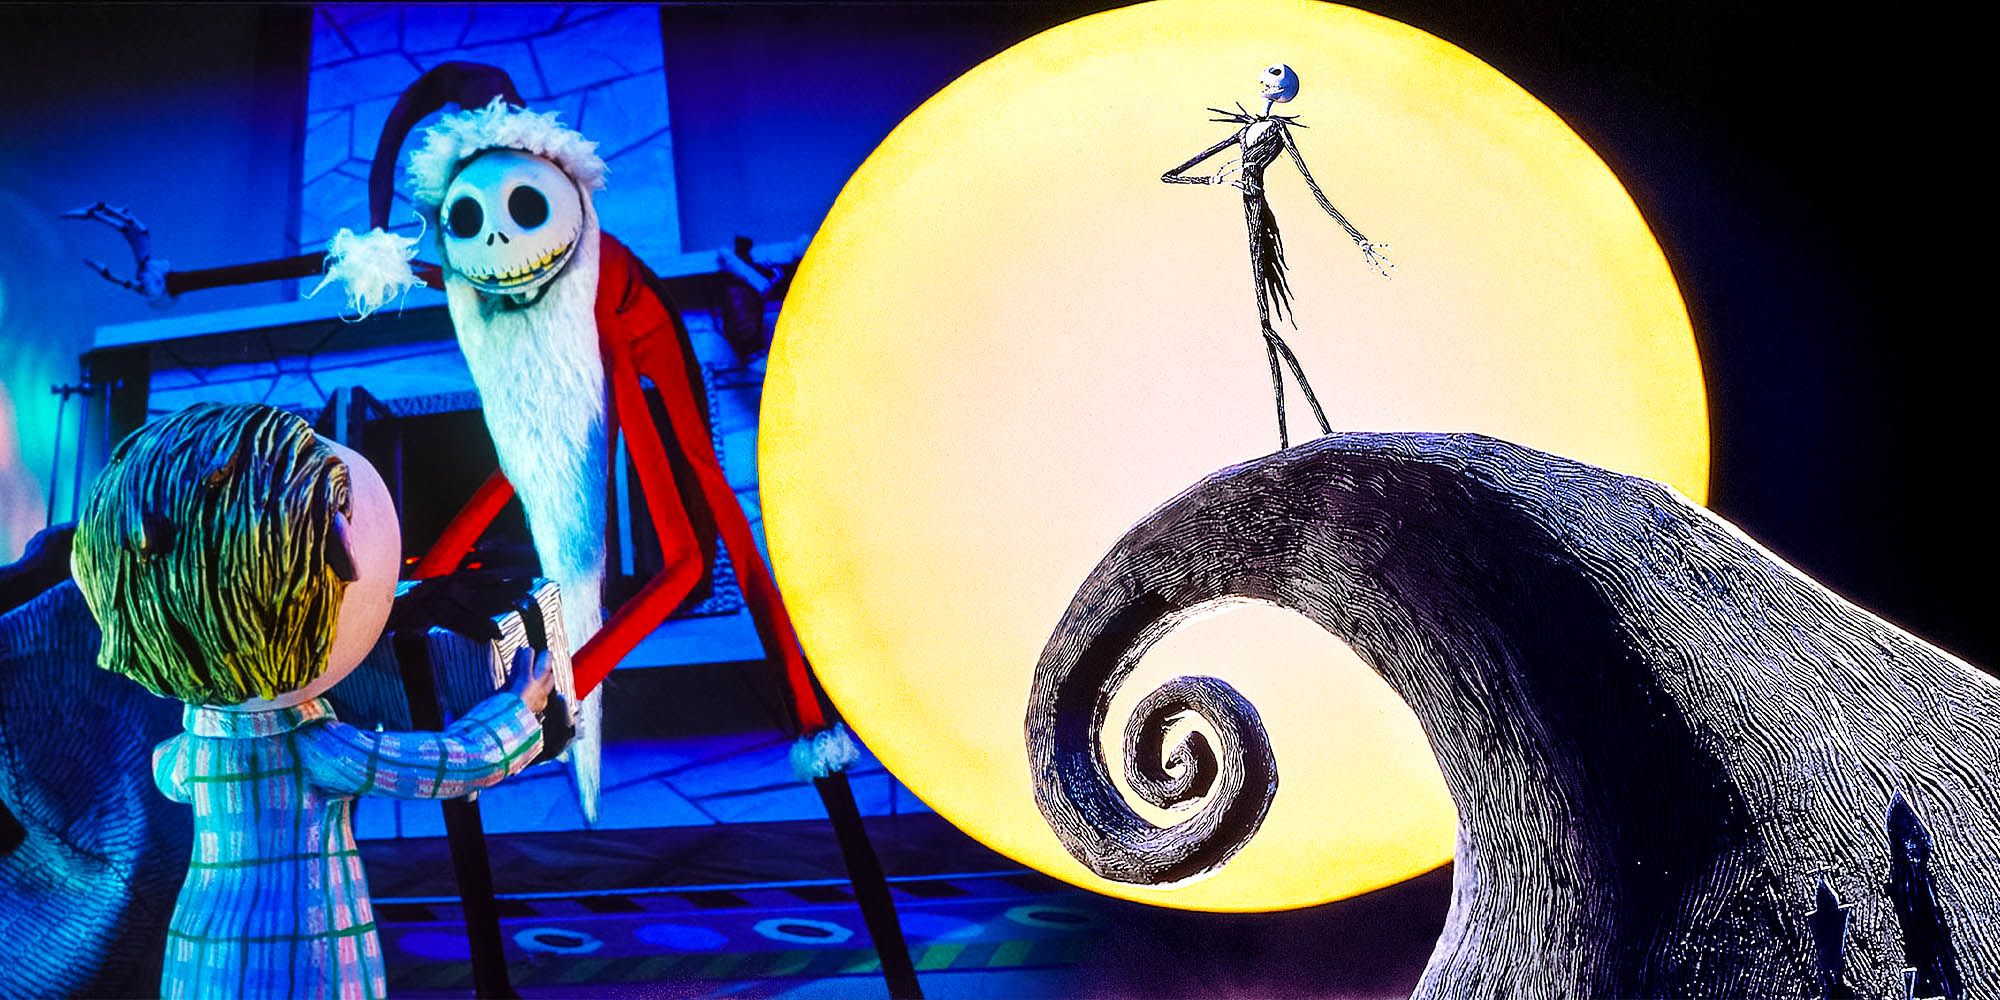 Is Nightmare Before Christmas A Halloween Or Christmas Movie?